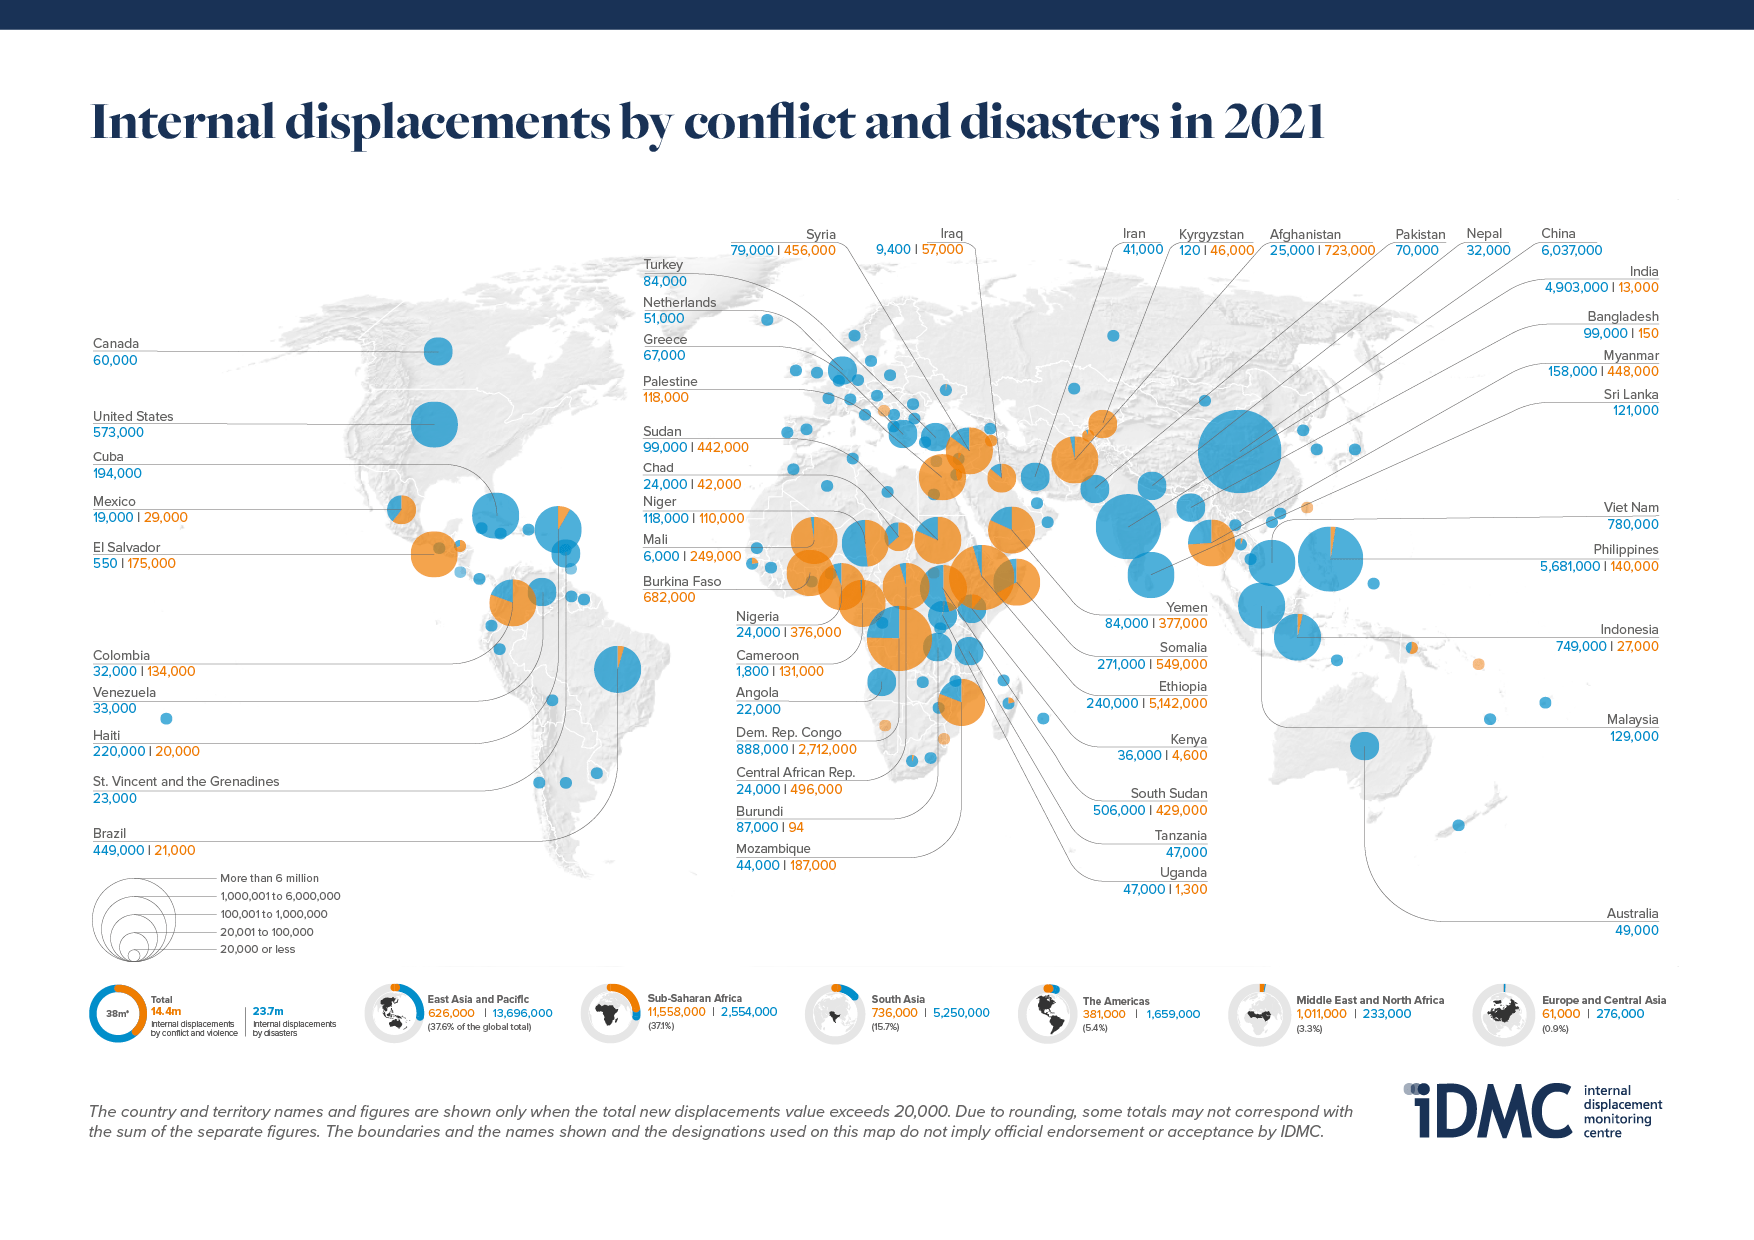 New displacements by conflict, violence and disasters worldwide (2021)